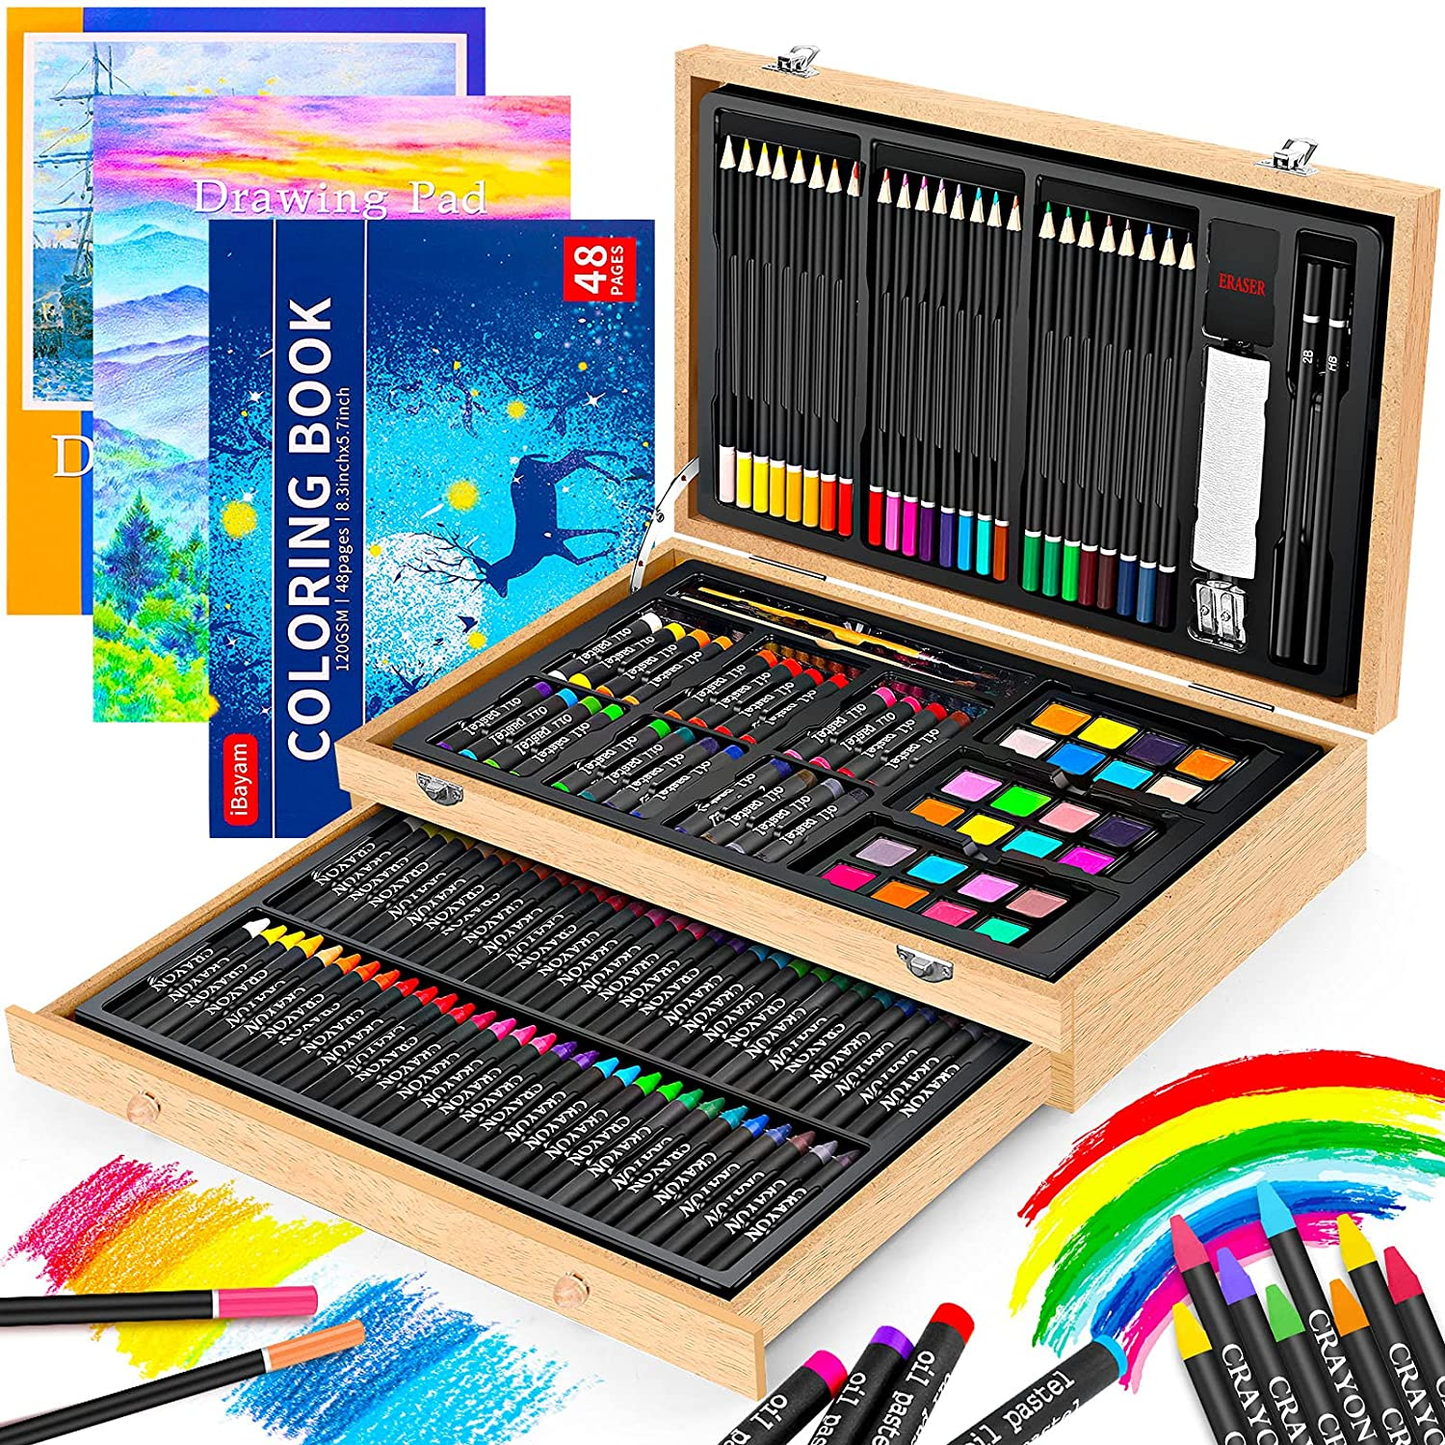 Generic 150pcs Art Drawing Set Painting Sketching Color Pen For